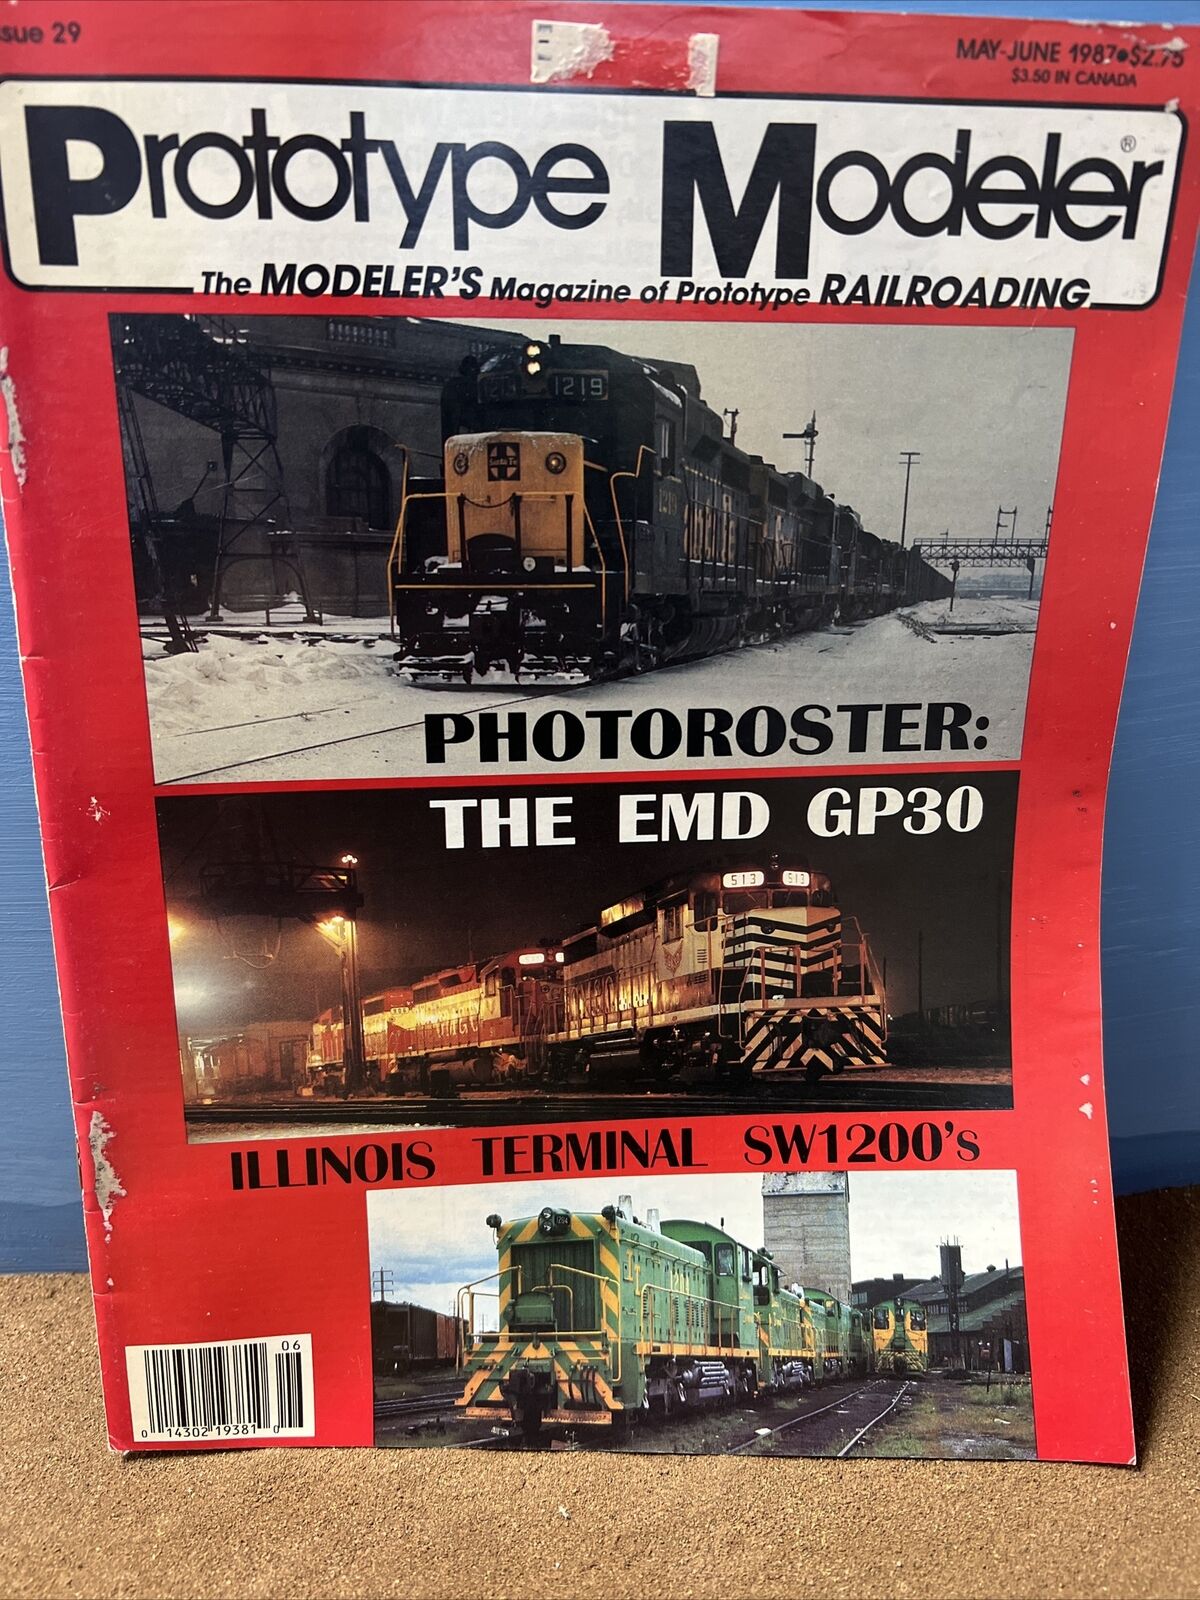 PROTOTYPE MODELER (May-June 1987, Vol 9 - No 11)  Issue 29 VG CONDITION